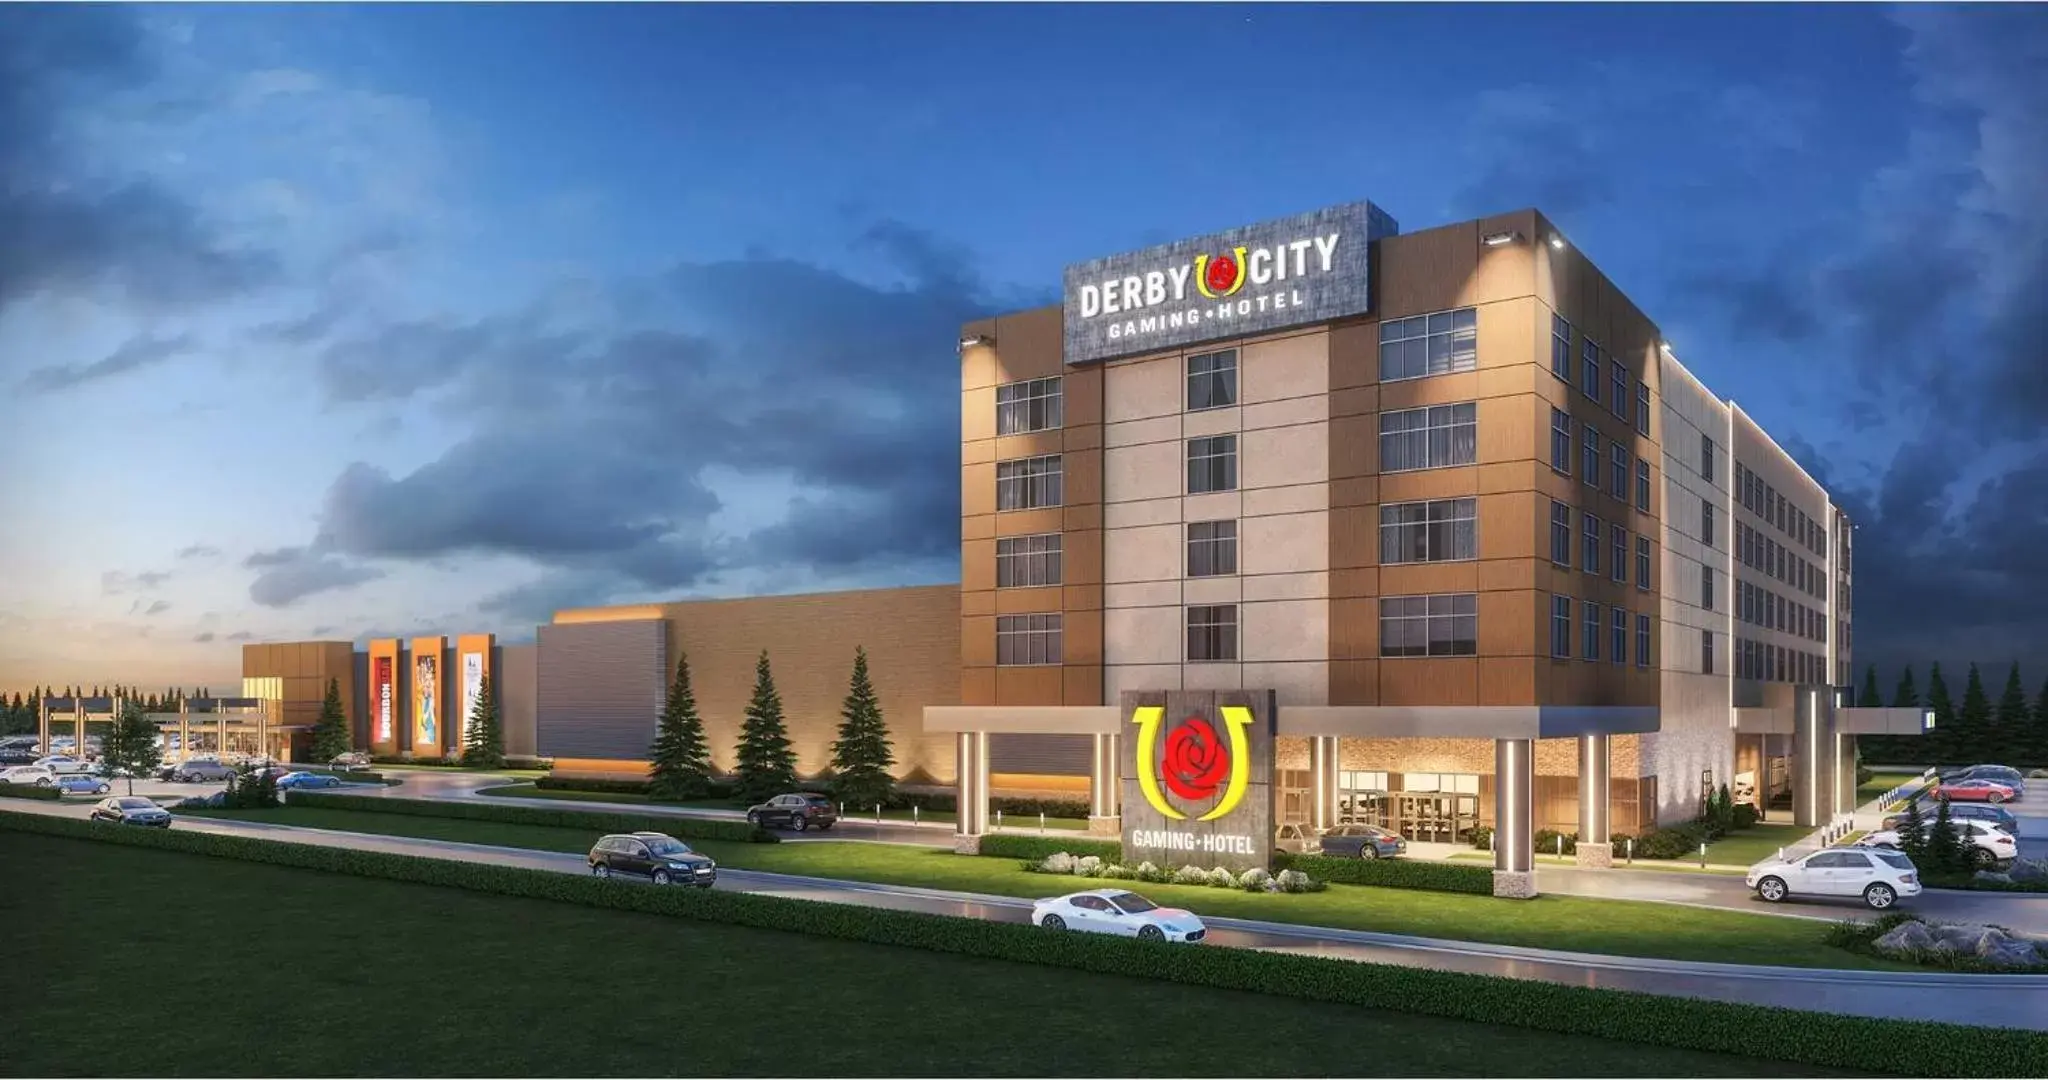 Property Building in Derby City Gaming & Hotel - A Churchill Downs Property